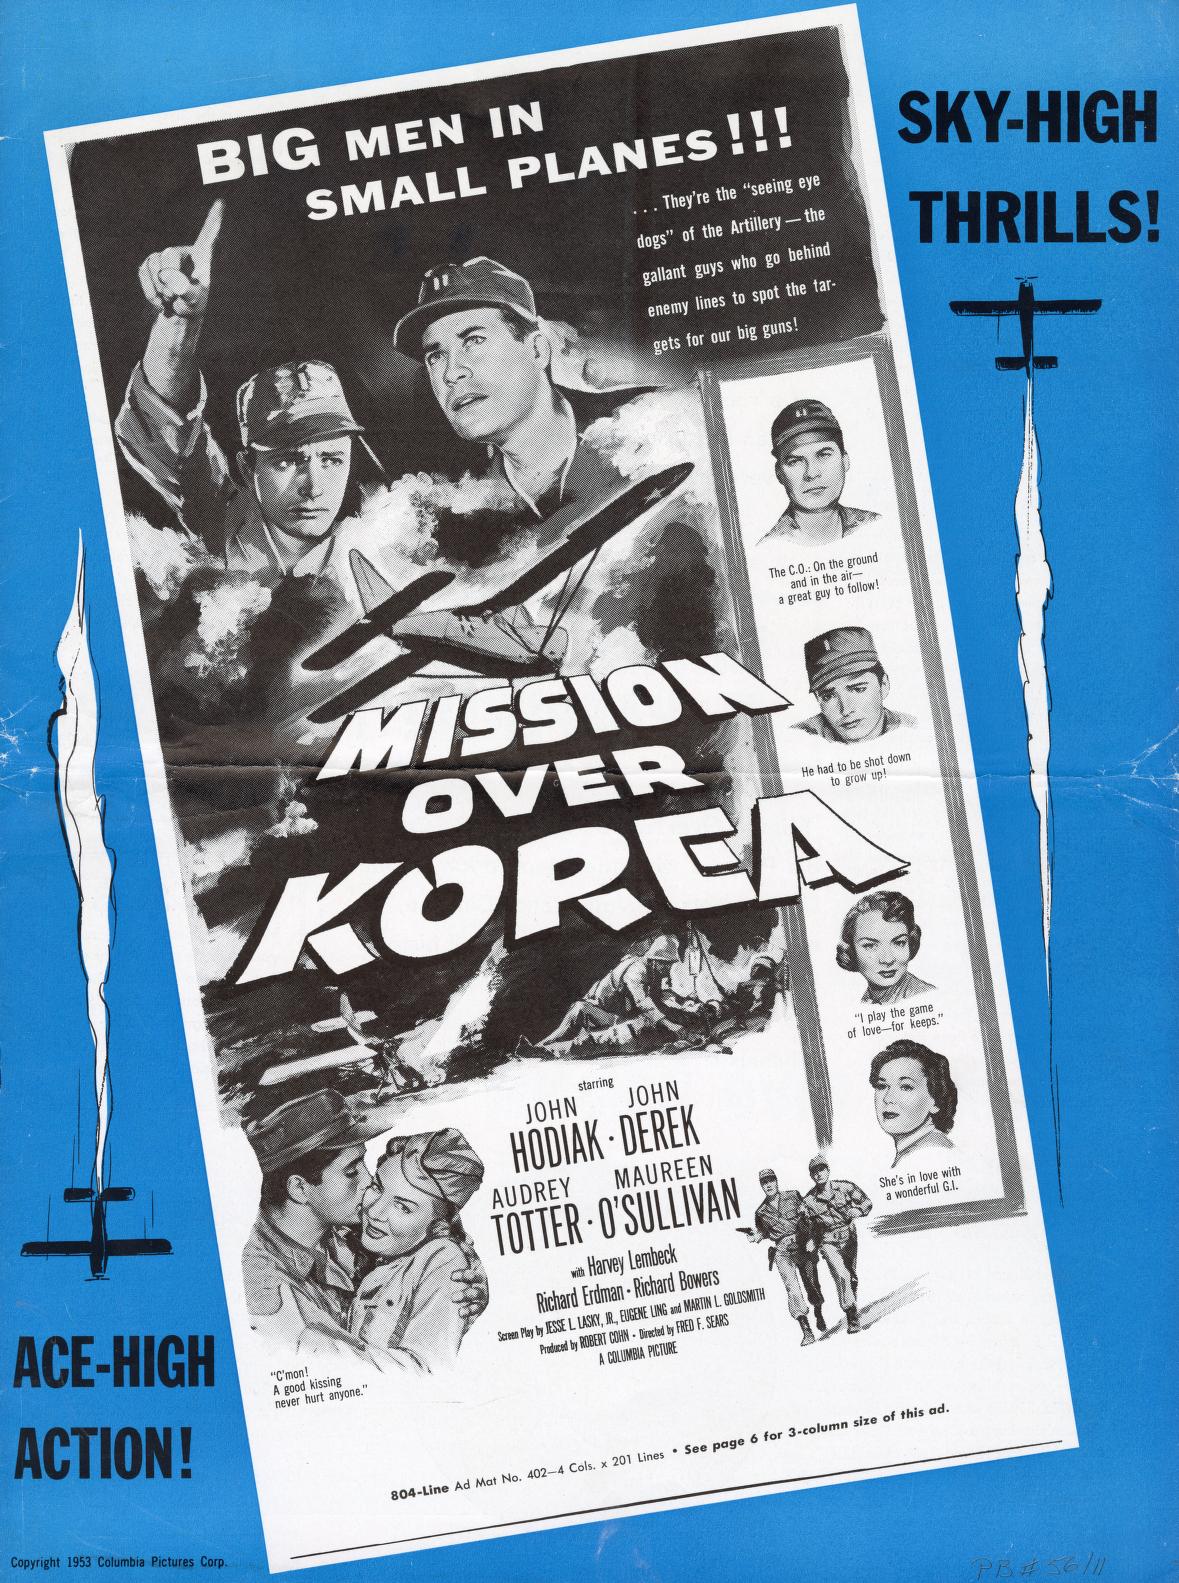 Mission over Korea (Columbia Pictures)